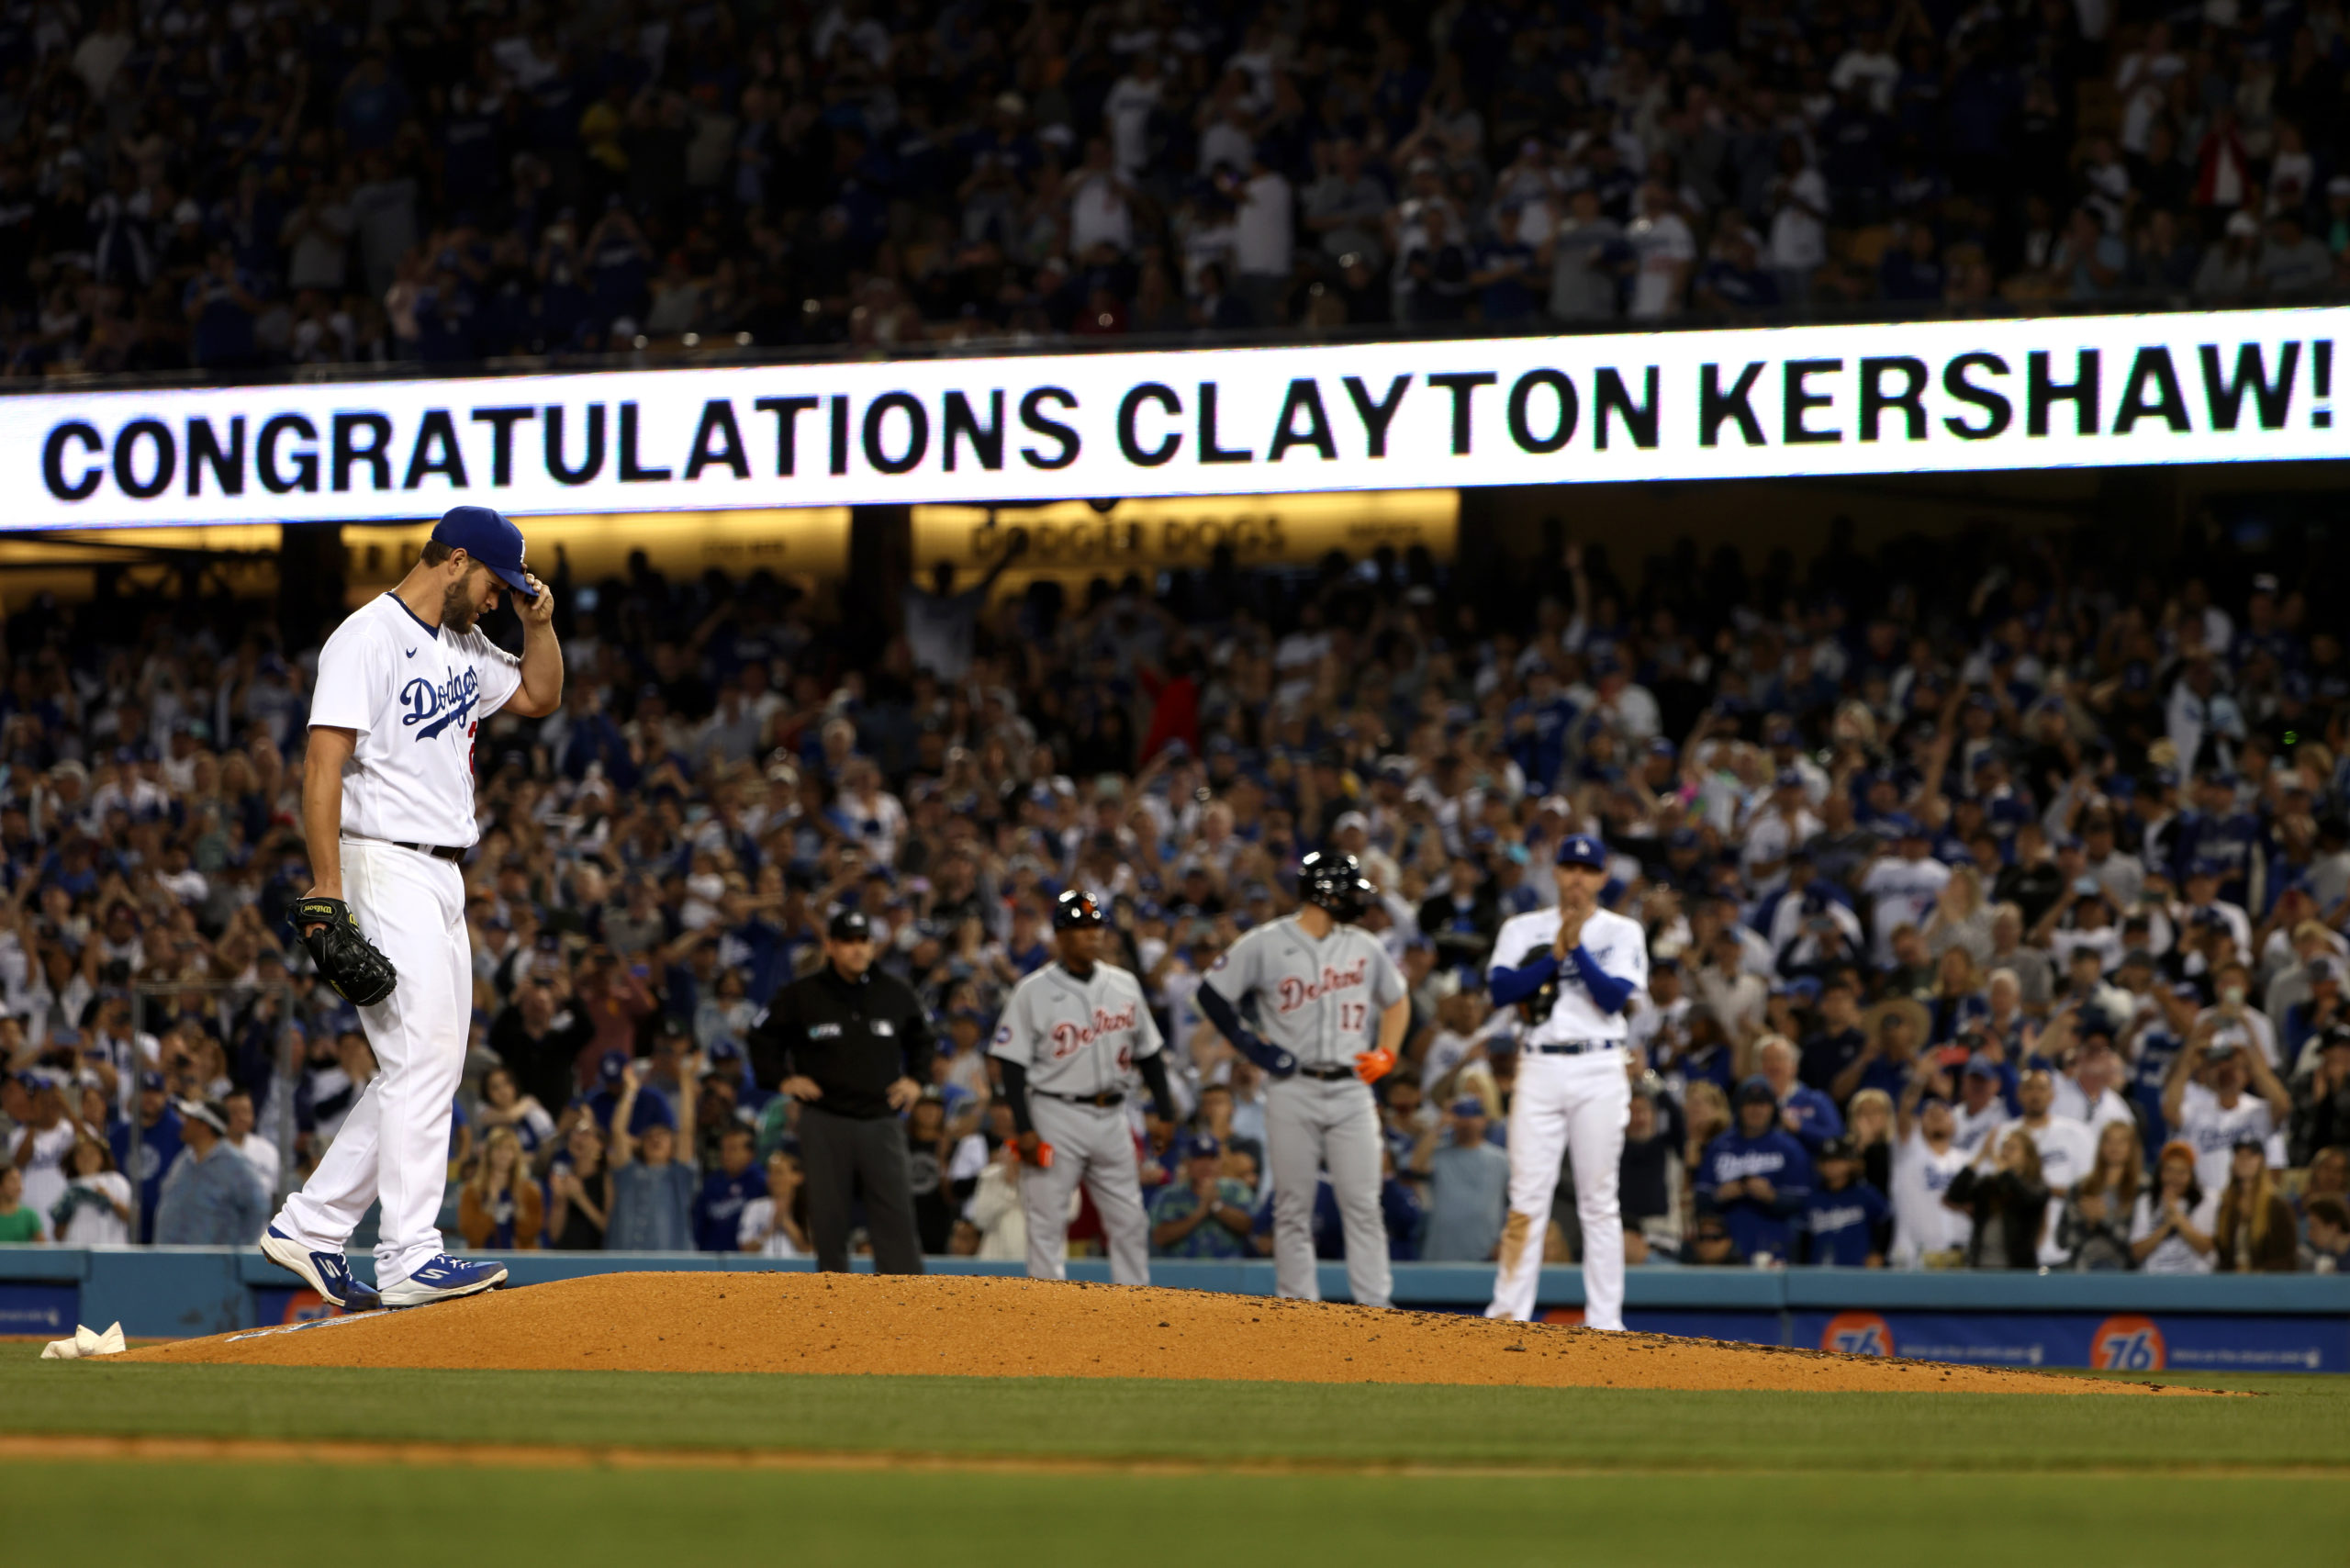 Clayton Kershaw Becomes Dodgers’ Franchise Strikeout Leader – NBC Los Angeles